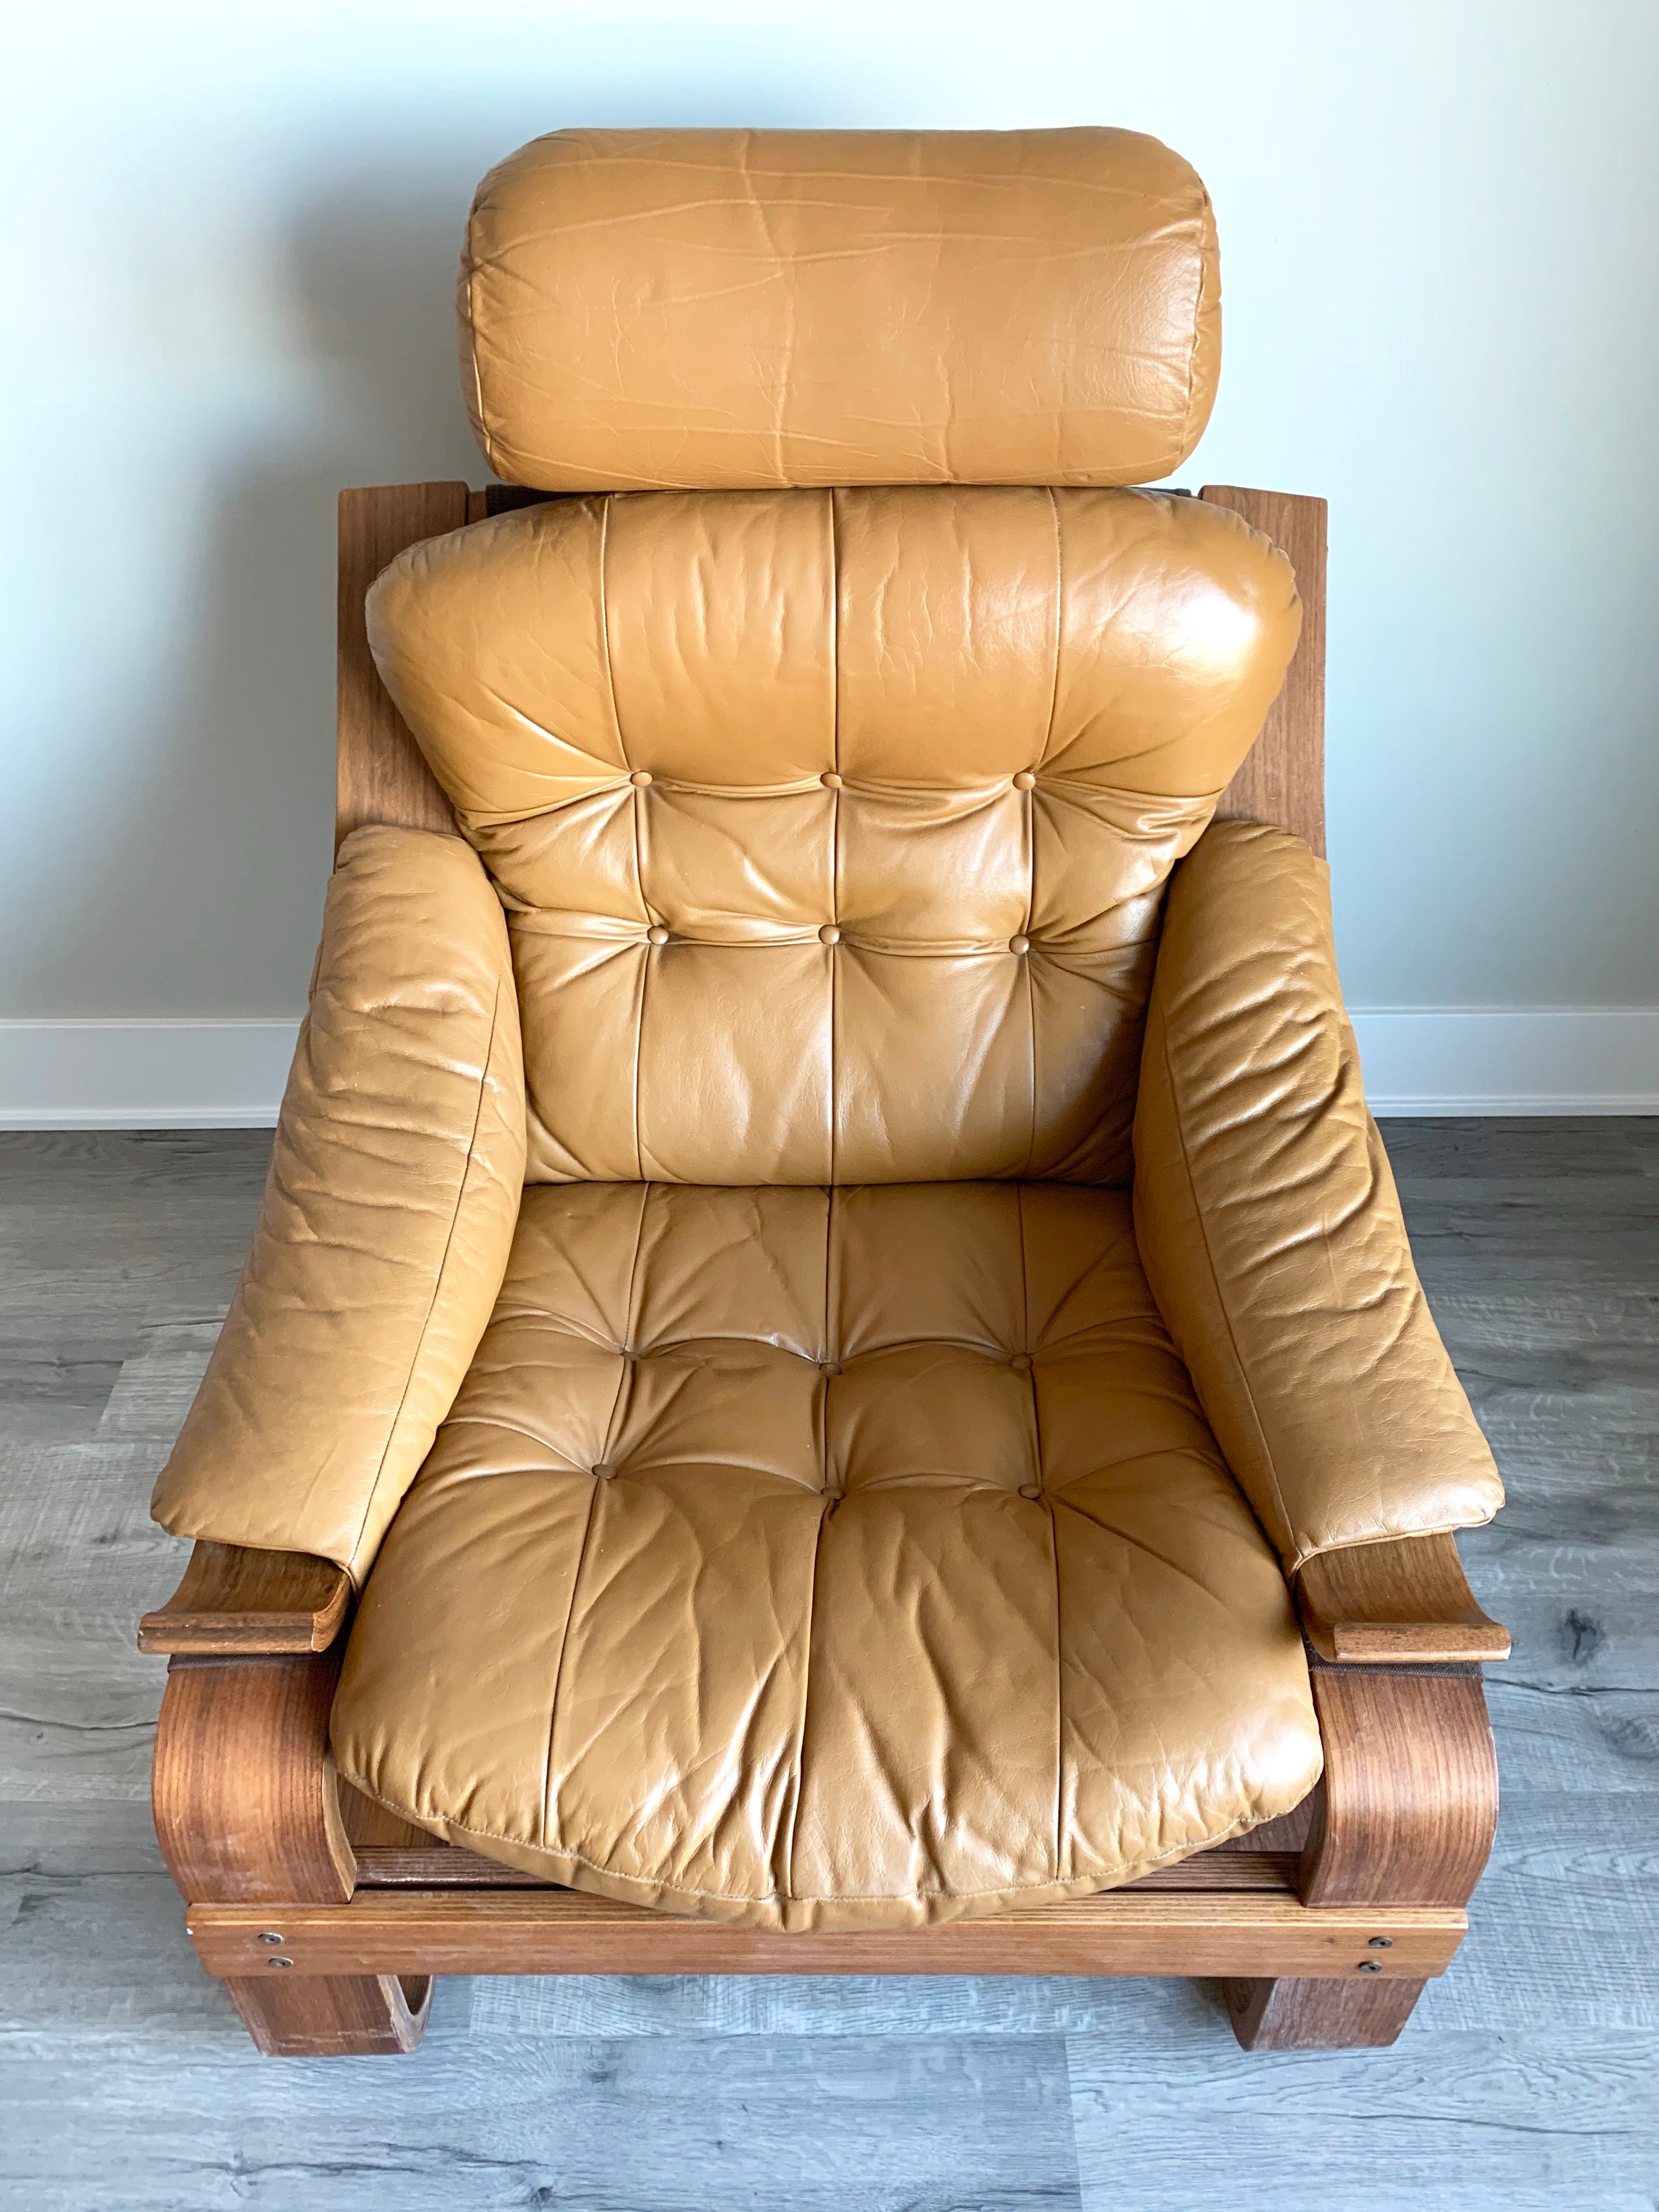 Vintage Rosewood Lounge Chair in Leather